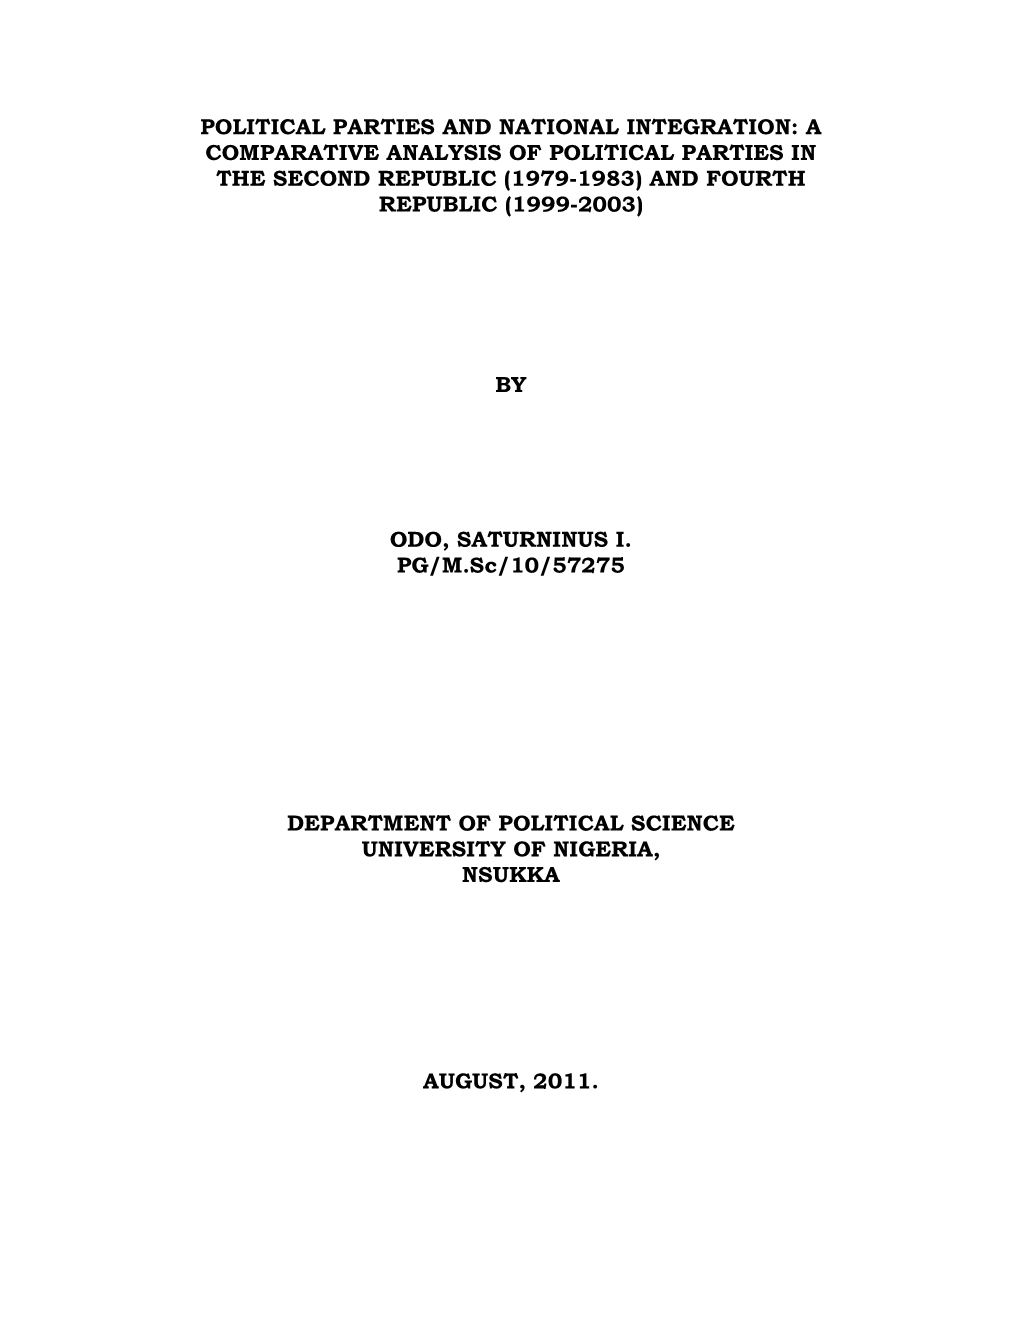 Political Parties and National Integration: a Comparative Analysis of Political Parties in the Second Republic (1979-1983) and Fourth Republic (1999-2003)